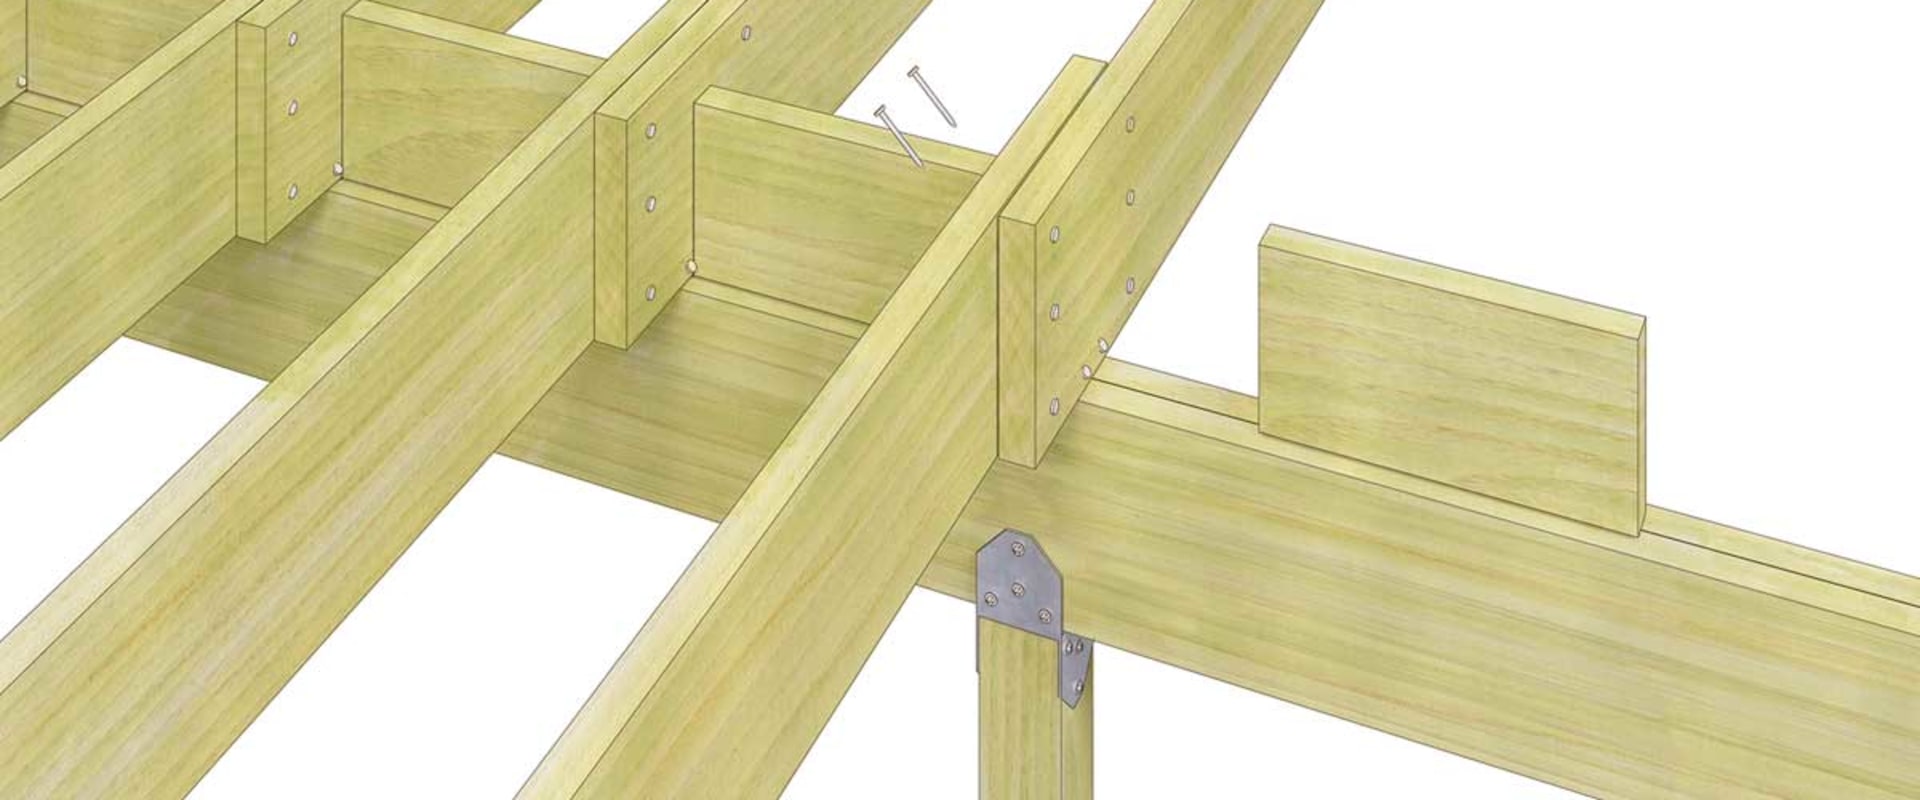 How Much Space Should You Leave Between Posts and Beams When Building a Deck?